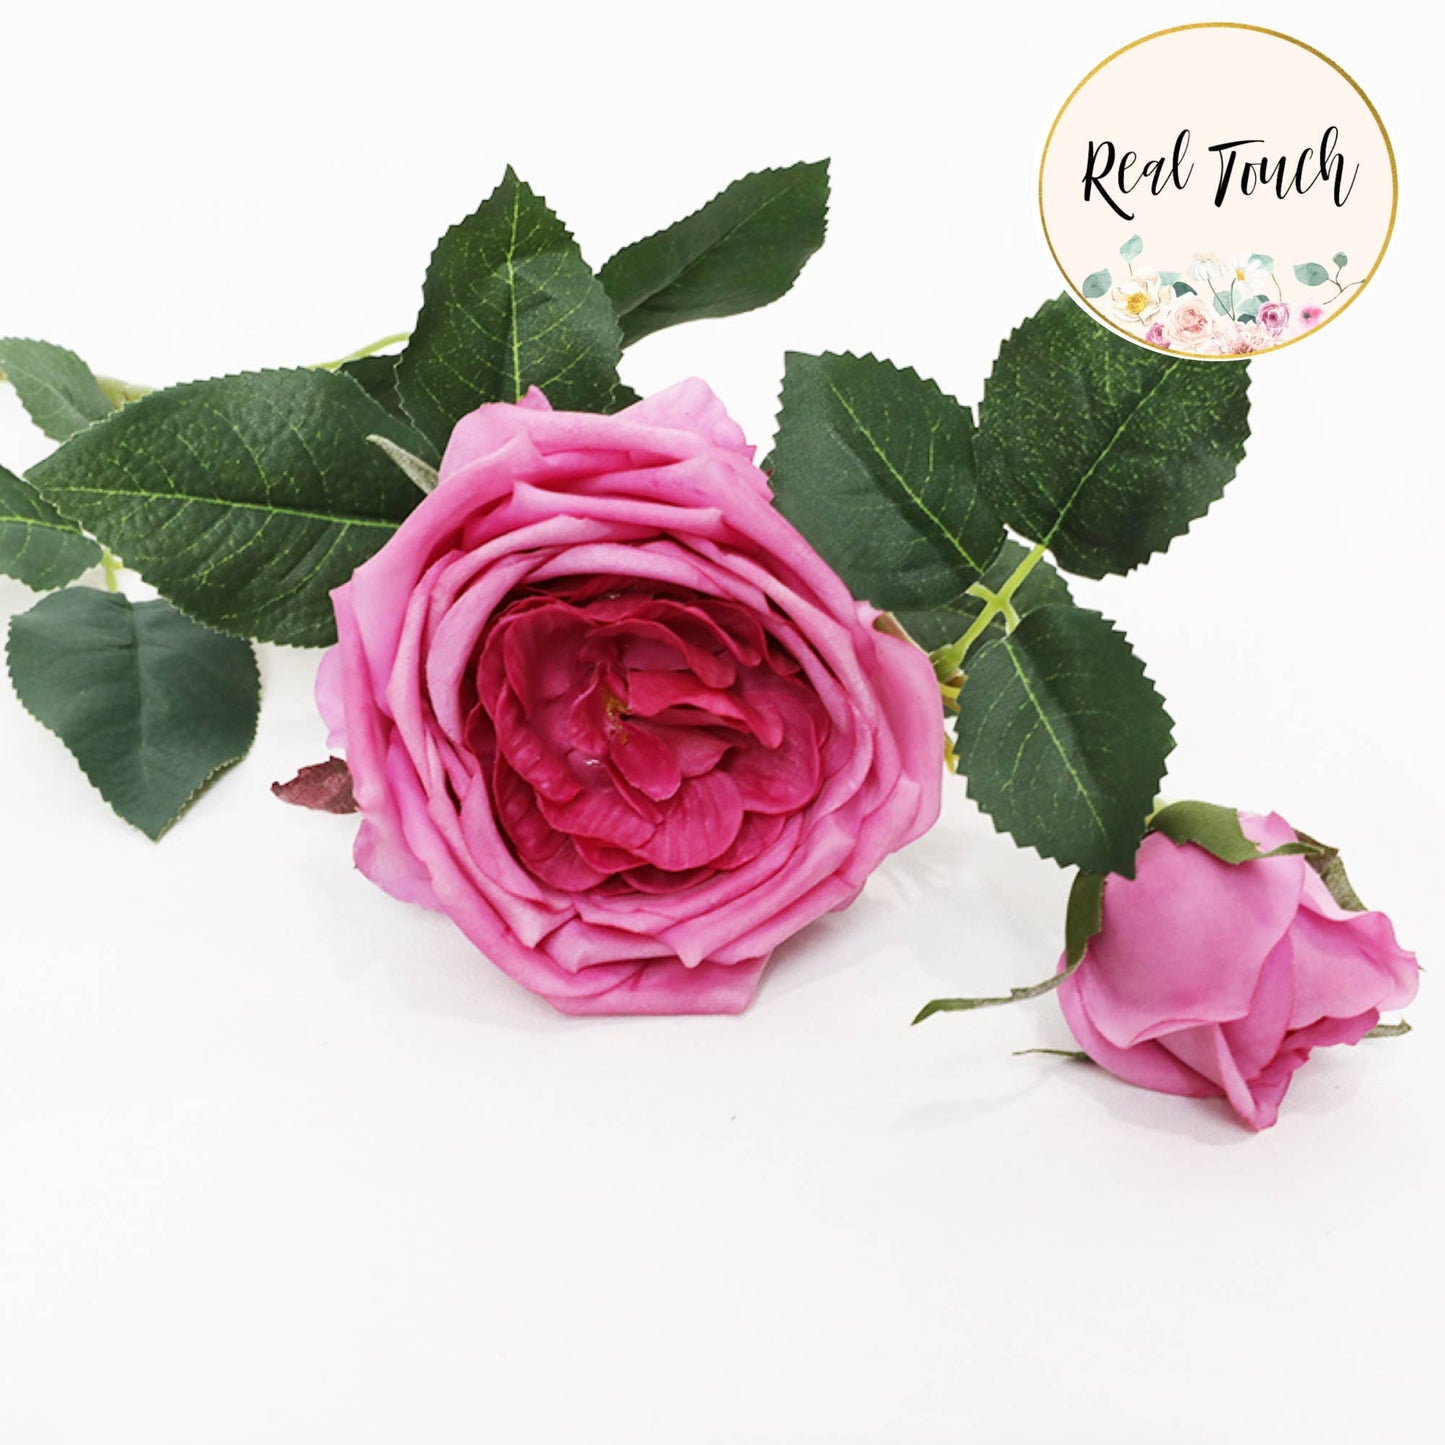 26.5"-real touch English Cabbage Rose spray